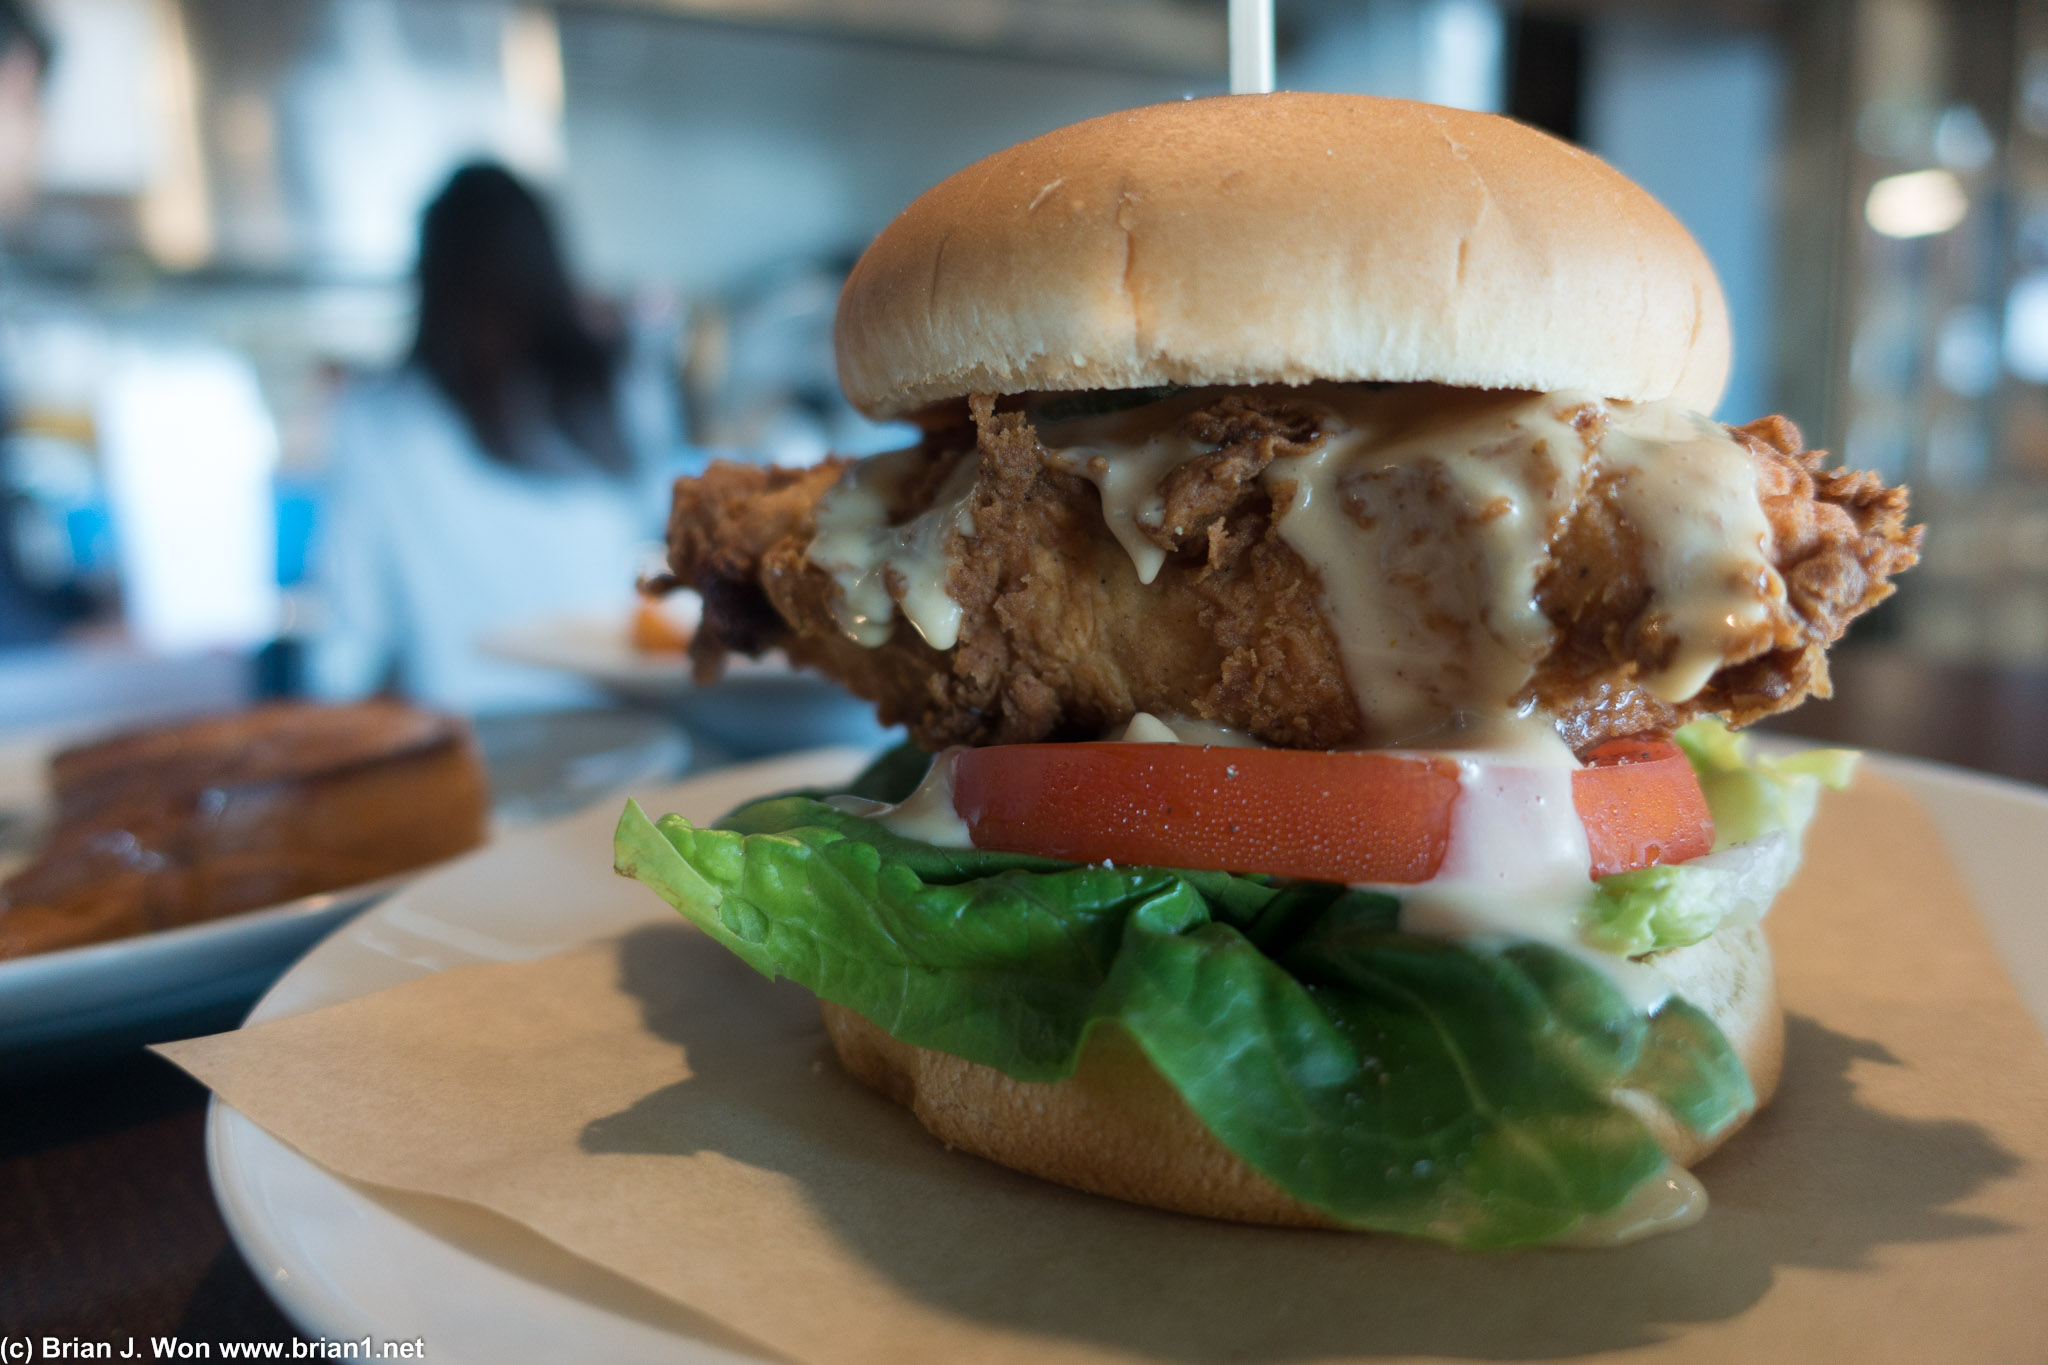 Pepper fried chicken bun was a pretty ordinary chicken sandwich. Like everything else, style over taste.